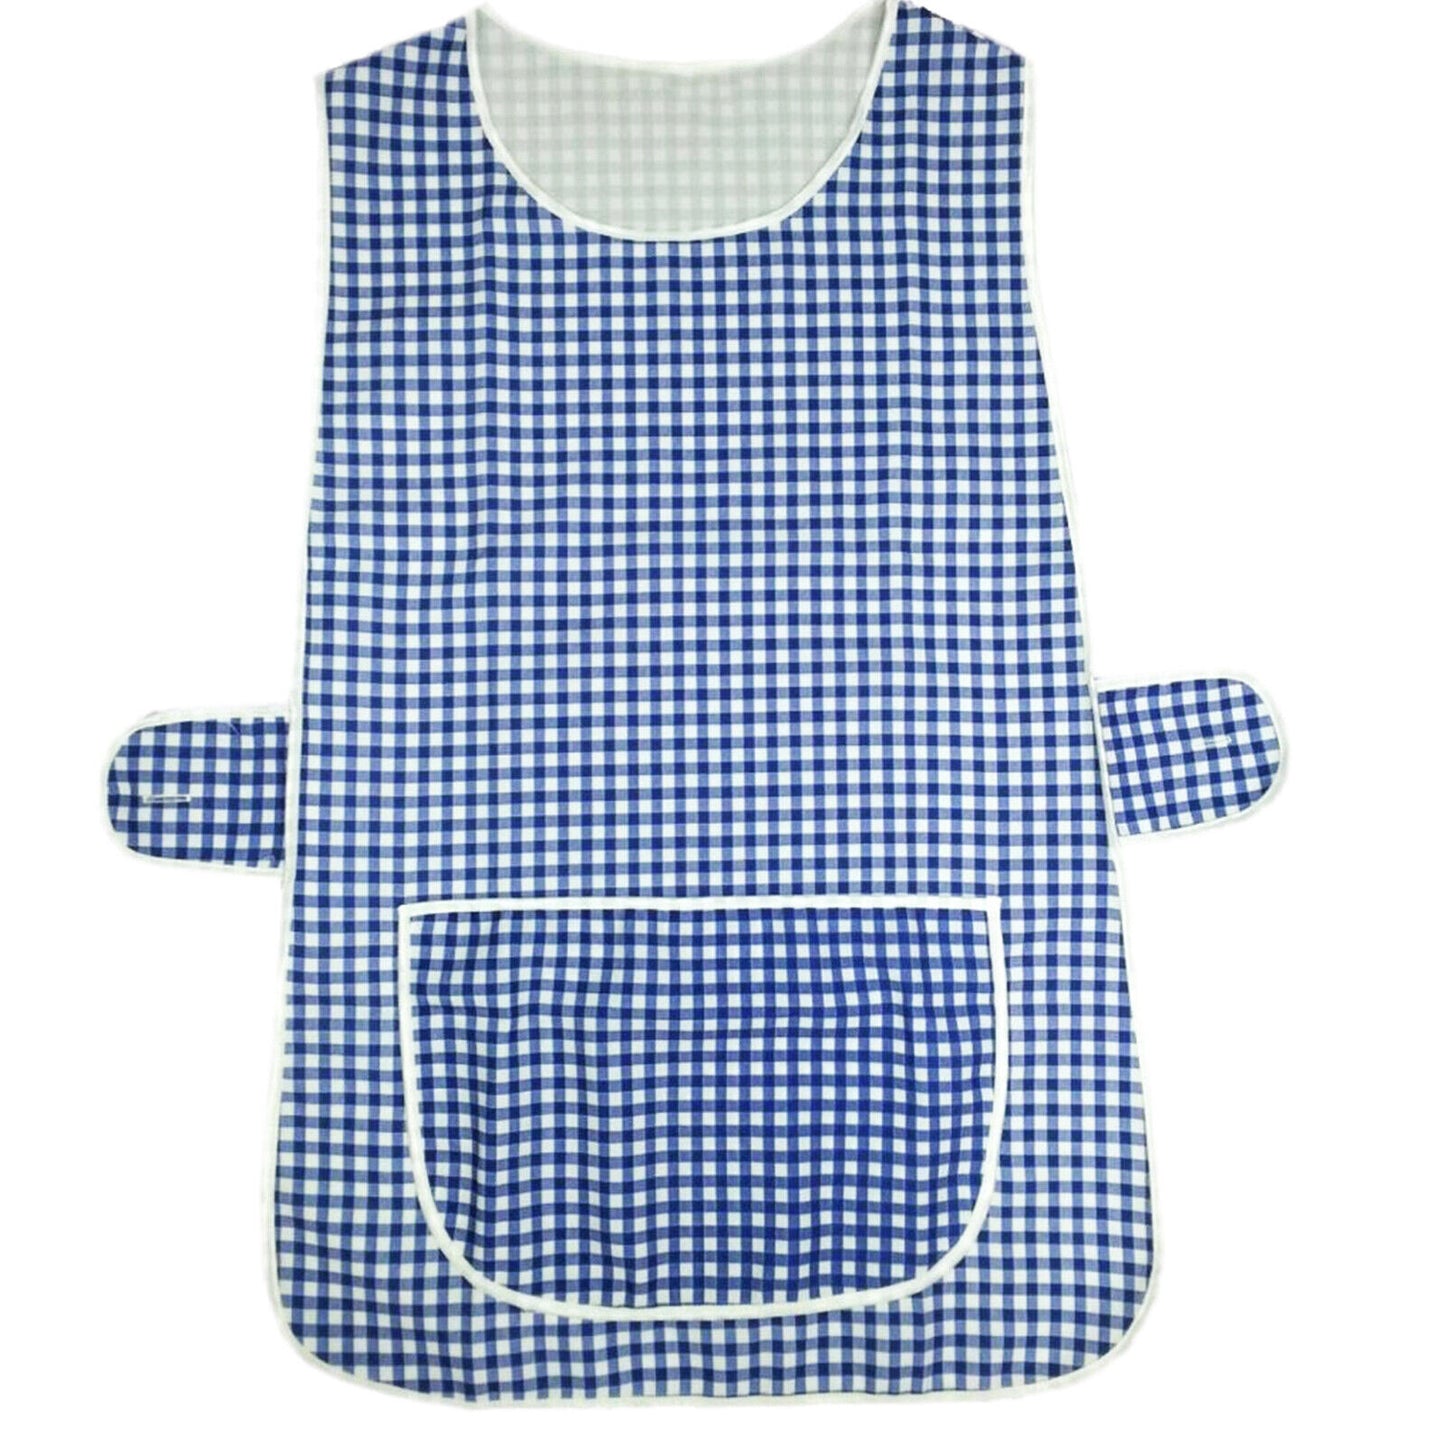 WHITE PIPING TABARD LADIES WOMEN APRON OVERALL KITCHEN CATERING CLEANING BAR TABBARD